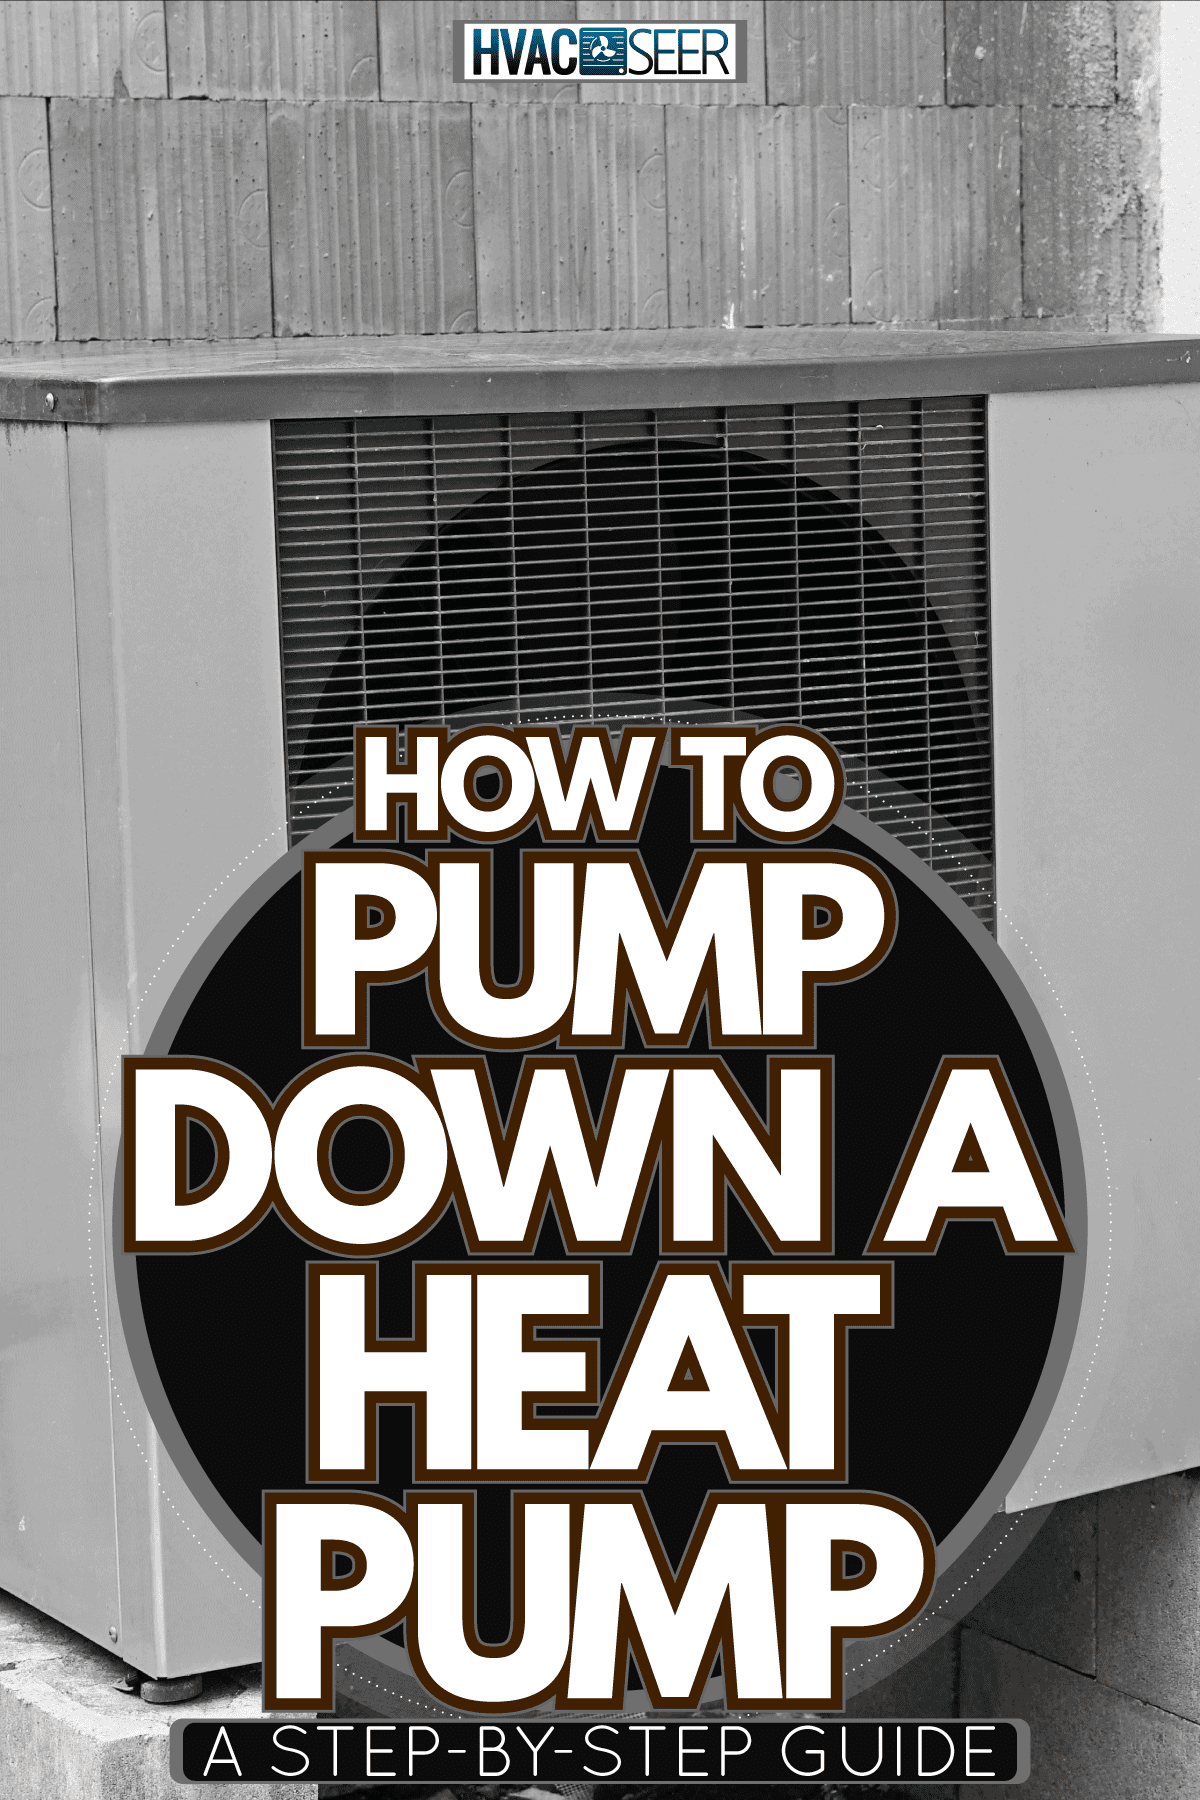 A heat pump placed on top of concrete cinderblocks, How To Pump Down A Heat Pump [ A Step-By-Step Guide]